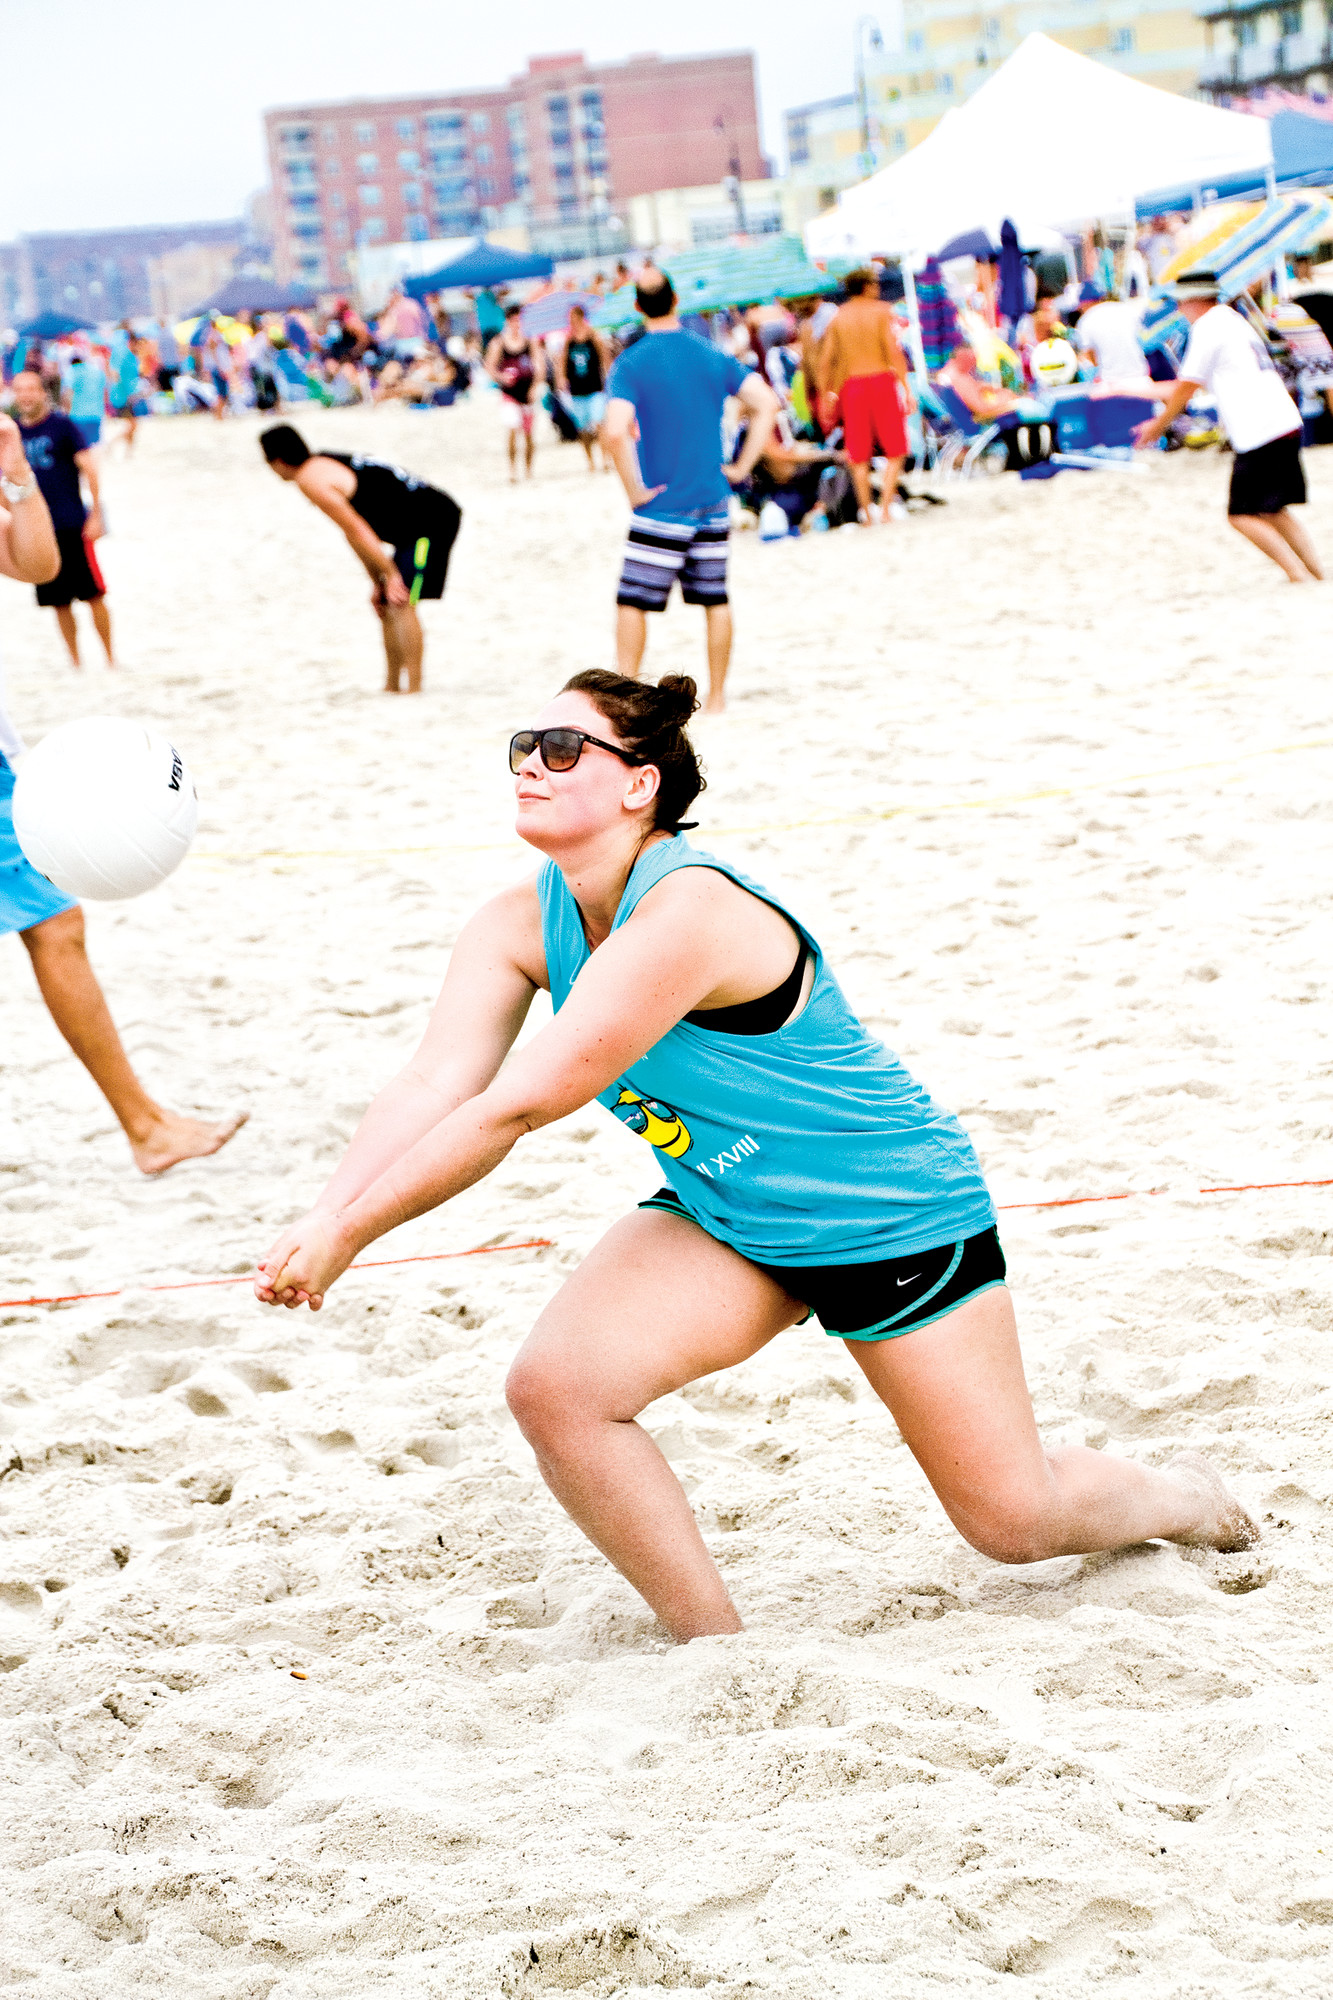 Gabi Cherner, of team Inside Spike, dove for the ball at last year’s tournament.